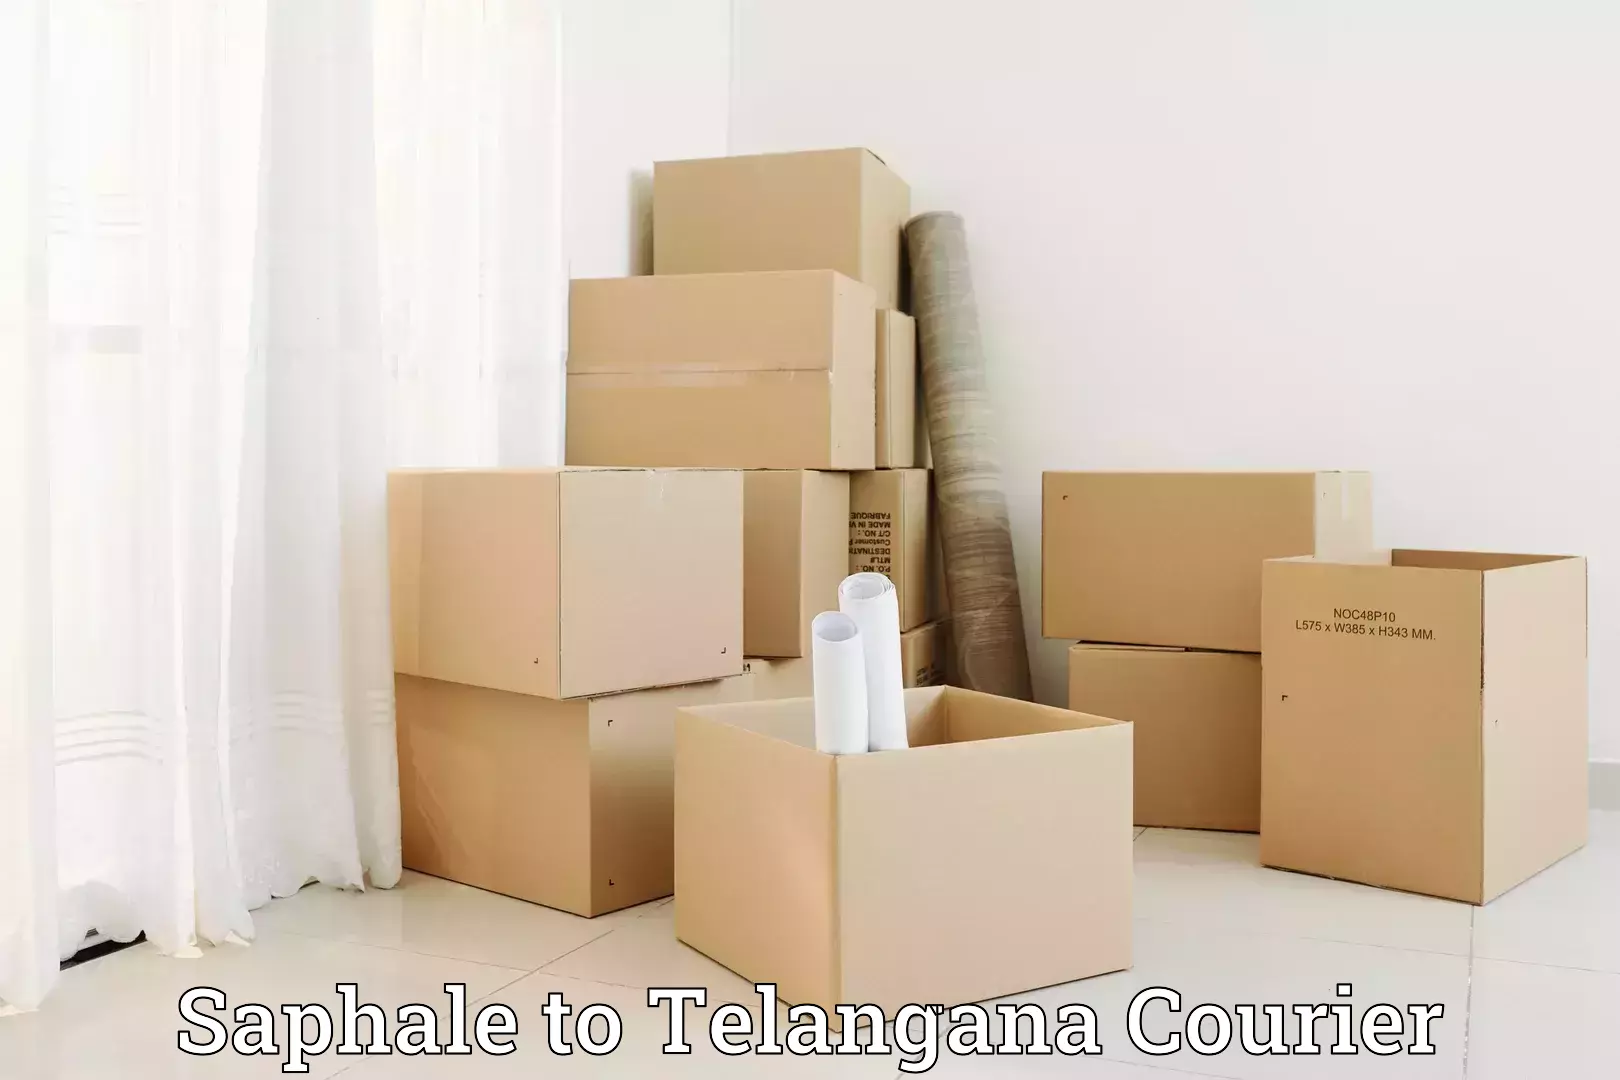 Luggage transfer service Saphale to Mominpet